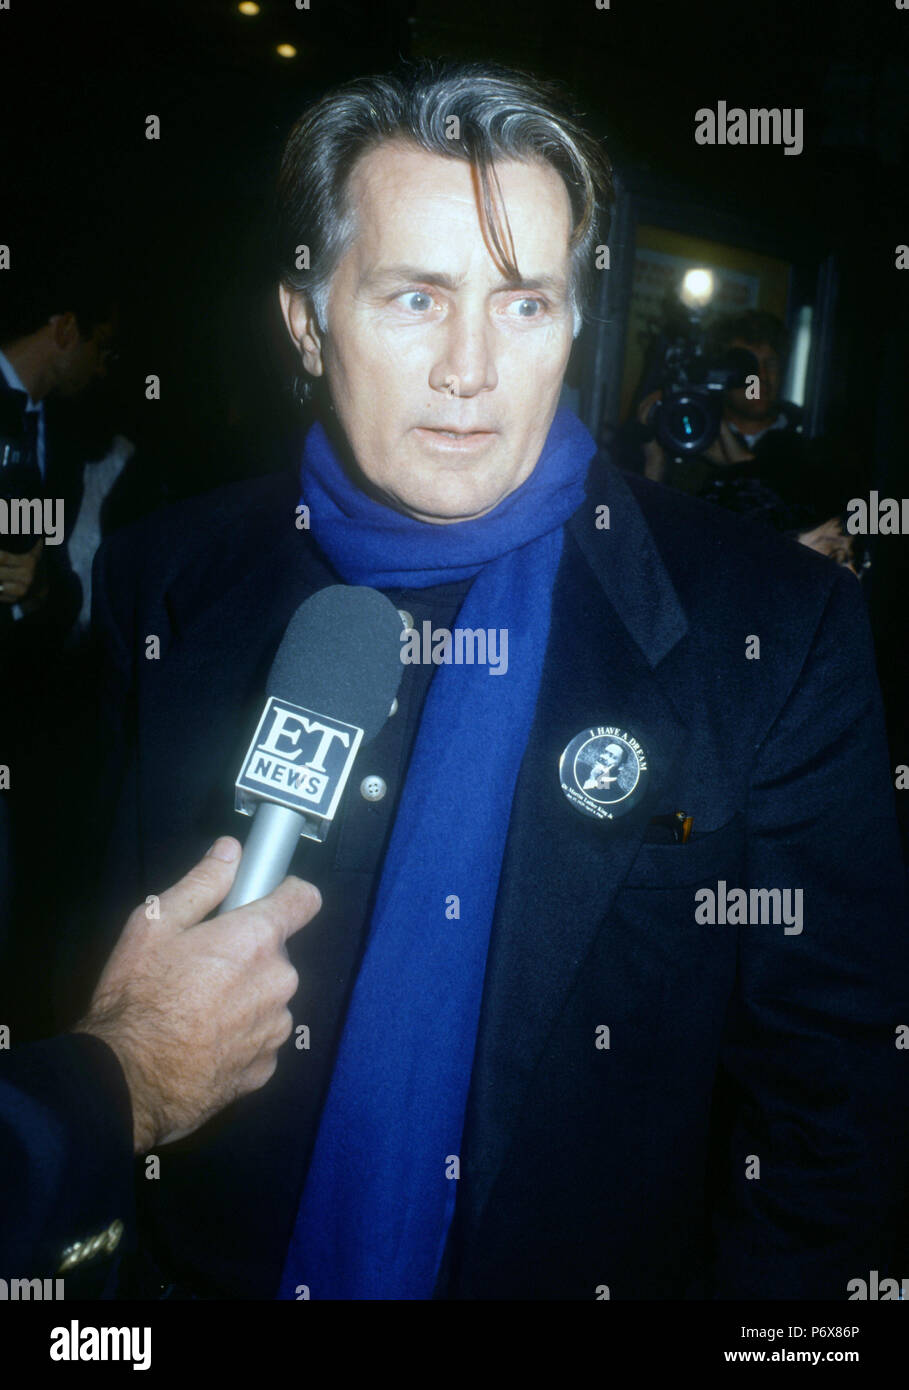 LOS ANGELES, CA - JANUARY 14: Actor Martin Sheen attends 'Hearts of Darkness: A Filmmaker's Apocalypse' Westwood Premiere on January 14, 1992 at the Mann Village Theatre in Westwood, Los Angeles, California. Photo by Barry King/Alamy Stock Photo Stock Photo